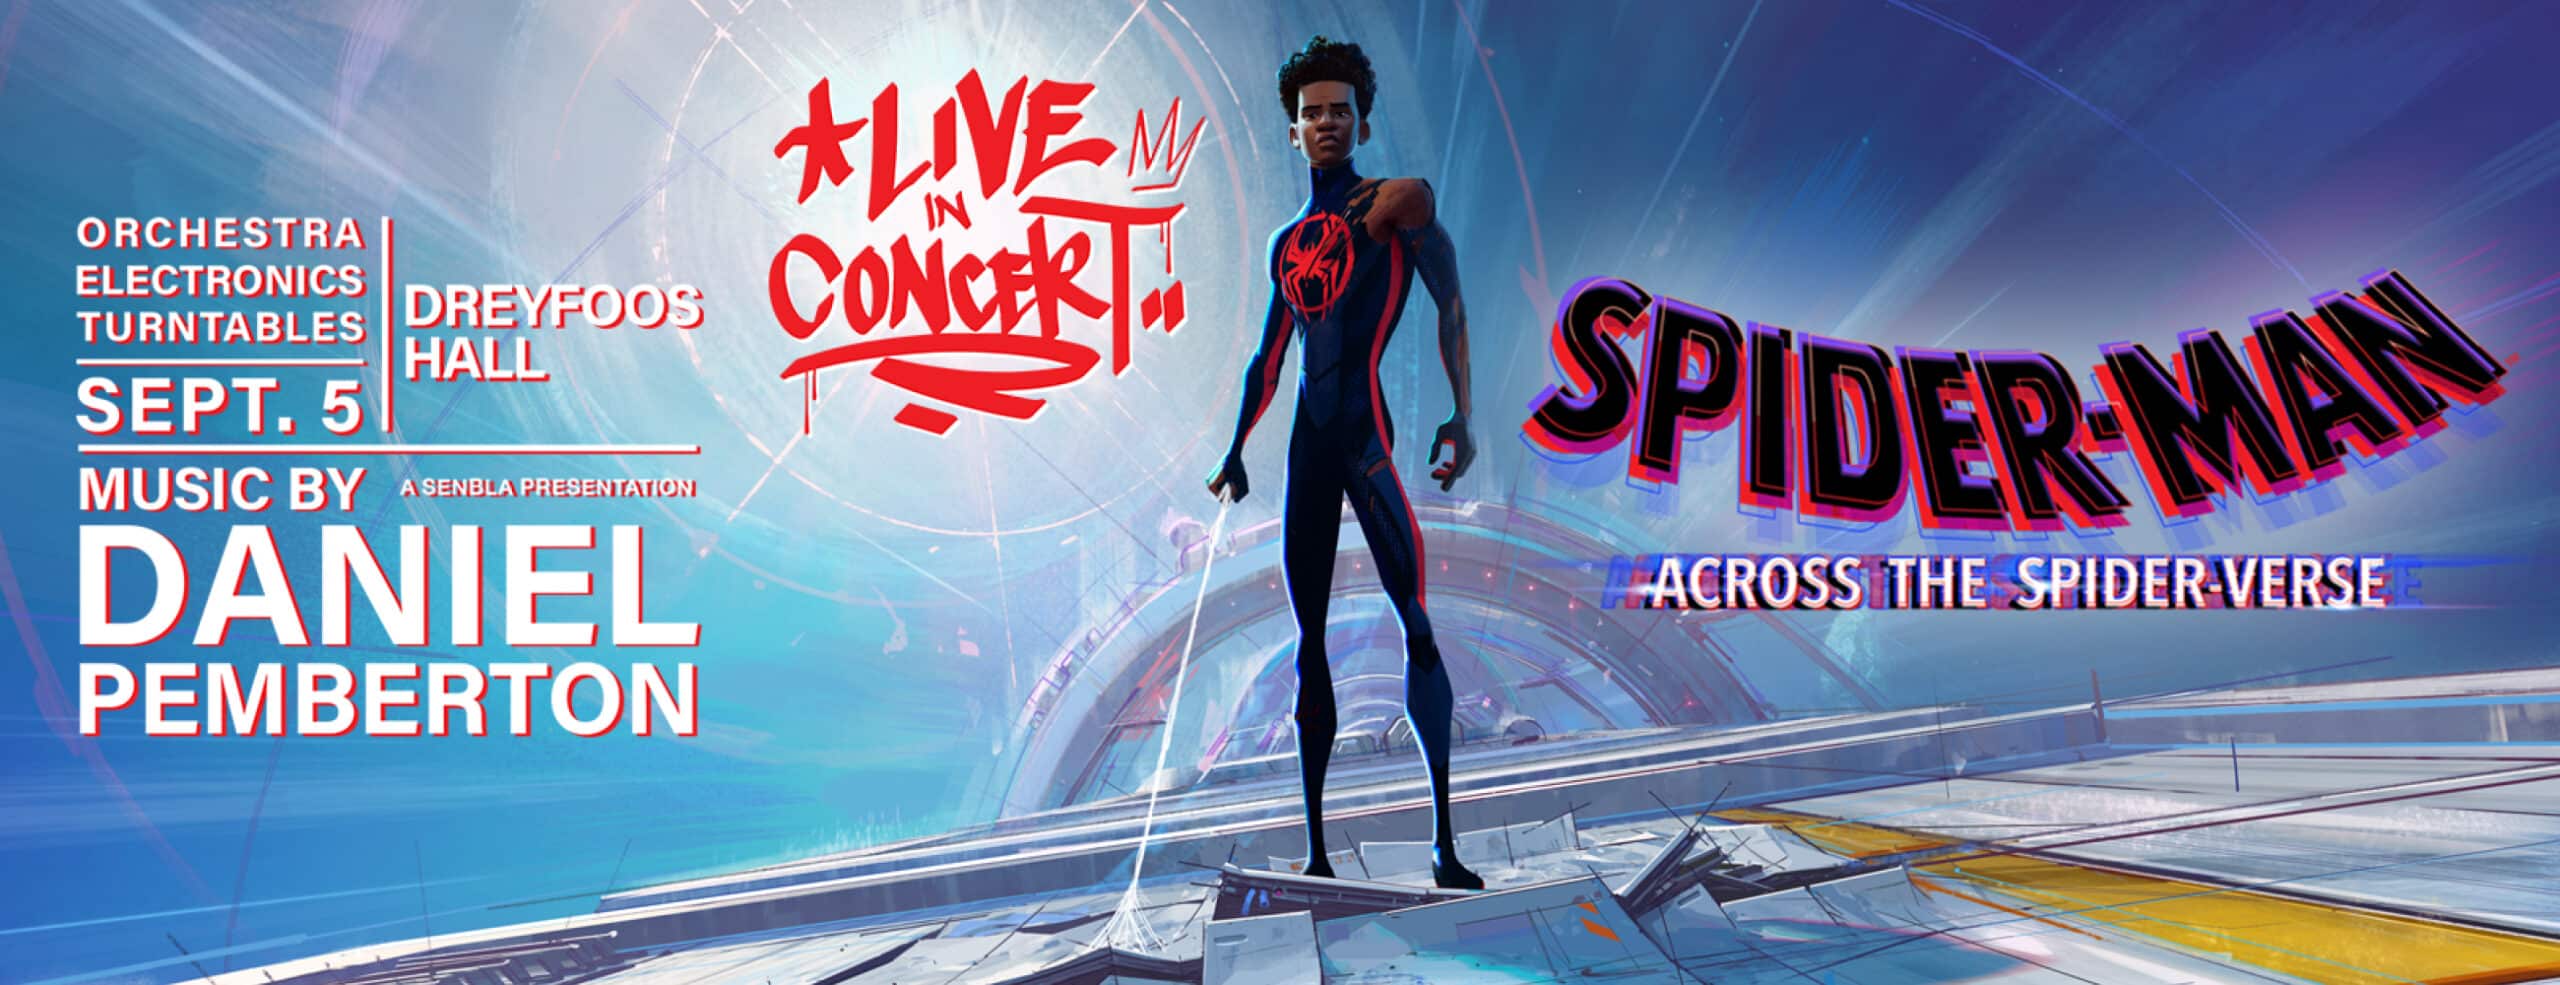 SPIDERMAN LIVE IN CONCERT ACROSS THE SPIDER-VERSE 